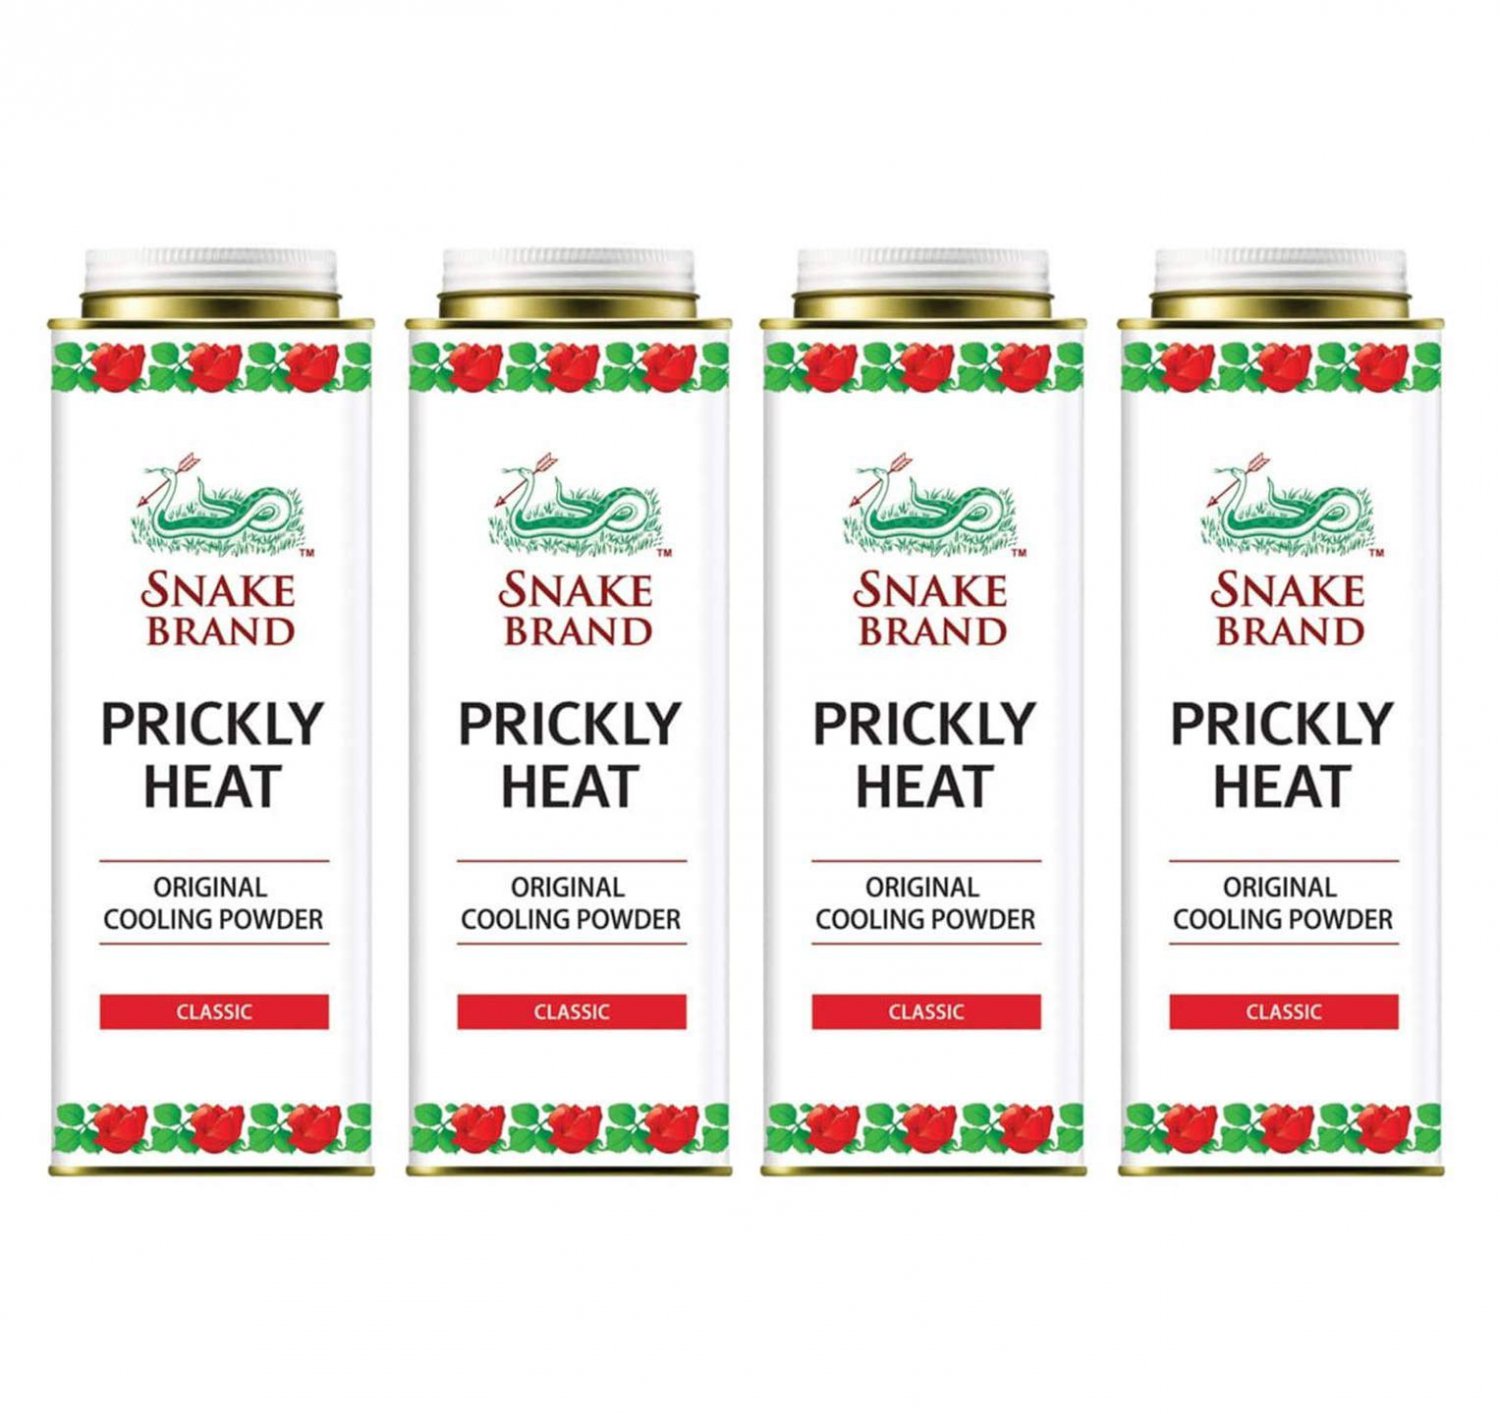 Snake Brand Prickly Heat Cooling Powder Classic 280 g. (4 Pack)